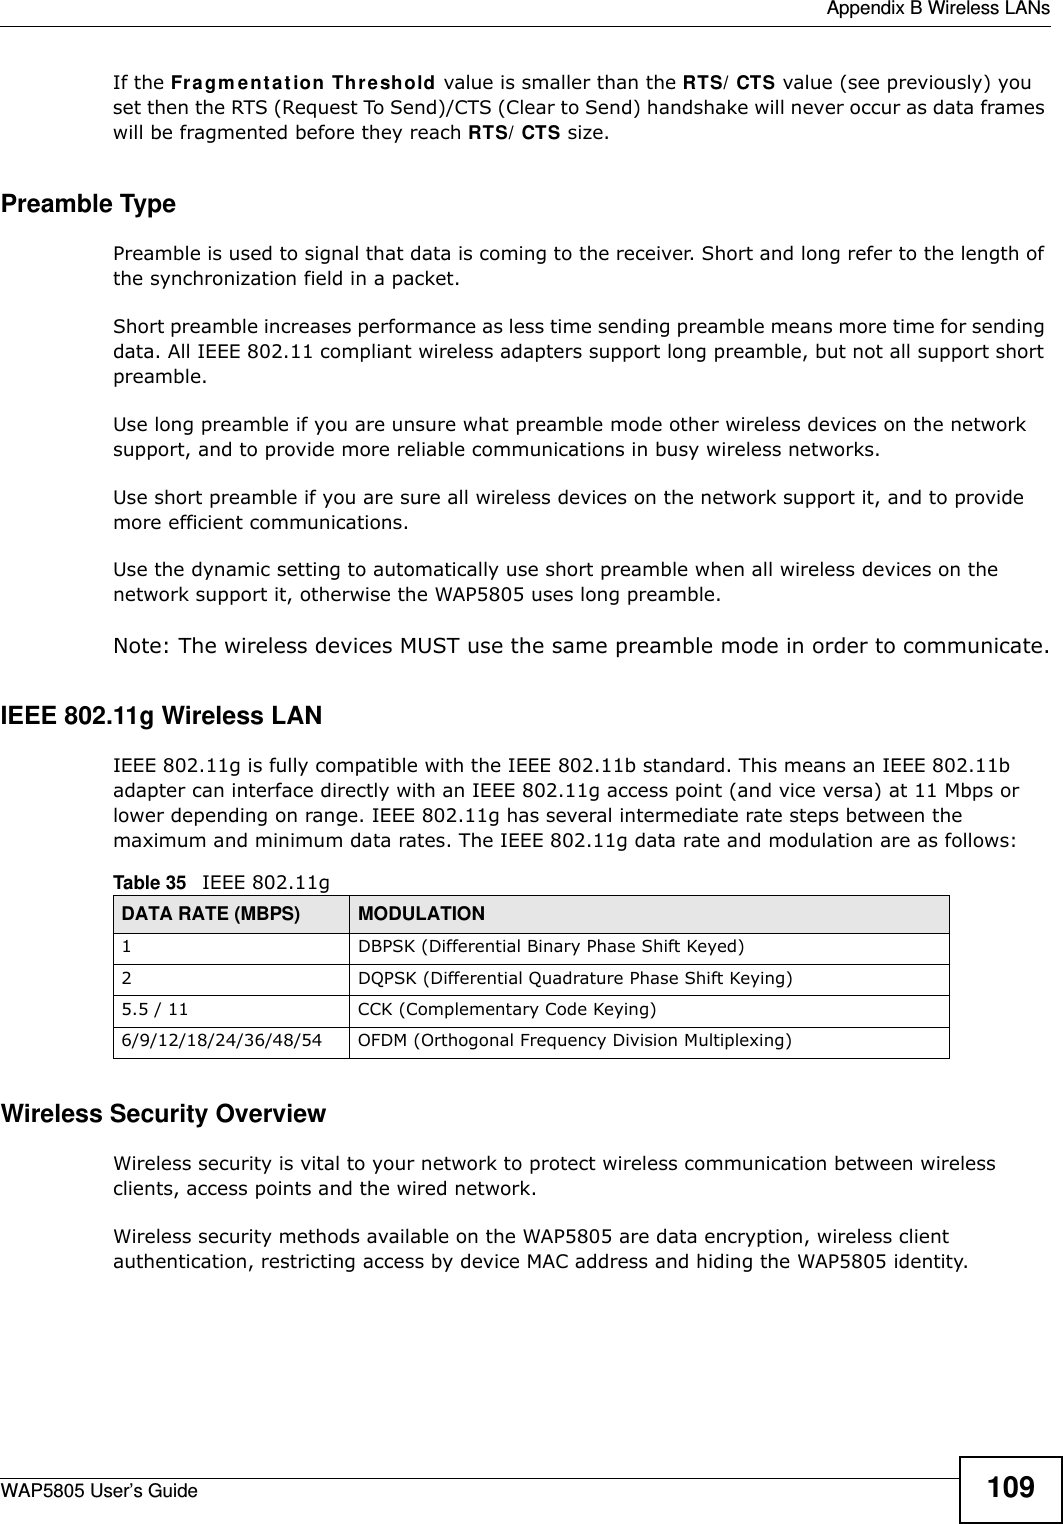  Appendix B Wireless LANsWAP5805 User’s Guide 109If the Fragmentation Threshold value is smaller than the RTS/CTS value (see previously) you set then the RTS (Request To Send)/CTS (Clear to Send) handshake will never occur as data frames will be fragmented before they reach RTS/CTS size.Preamble TypePreamble is used to signal that data is coming to the receiver. Short and long refer to the length of the synchronization field in a packet.Short preamble increases performance as less time sending preamble means more time for sending data. All IEEE 802.11 compliant wireless adapters support long preamble, but not all support short preamble. Use long preamble if you are unsure what preamble mode other wireless devices on the network support, and to provide more reliable communications in busy wireless networks. Use short preamble if you are sure all wireless devices on the network support it, and to provide more efficient communications.Use the dynamic setting to automatically use short preamble when all wireless devices on the network support it, otherwise the WAP5805 uses long preamble.Note: The wireless devices MUST use the same preamble mode in order to communicate.IEEE 802.11g Wireless LANIEEE 802.11g is fully compatible with the IEEE 802.11b standard. This means an IEEE 802.11b adapter can interface directly with an IEEE 802.11g access point (and vice versa) at 11 Mbps or lower depending on range. IEEE 802.11g has several intermediate rate steps between the maximum and minimum data rates. The IEEE 802.11g data rate and modulation are as follows:Wireless Security OverviewWireless security is vital to your network to protect wireless communication between wireless clients, access points and the wired network.Wireless security methods available on the WAP5805 are data encryption, wireless client authentication, restricting access by device MAC address and hiding the WAP5805 identity.Table 35   IEEE 802.11gDATA RATE (MBPS) MODULATION1 DBPSK (Differential Binary Phase Shift Keyed)2 DQPSK (Differential Quadrature Phase Shift Keying)5.5 / 11 CCK (Complementary Code Keying) 6/9/12/18/24/36/48/54 OFDM (Orthogonal Frequency Division Multiplexing) 